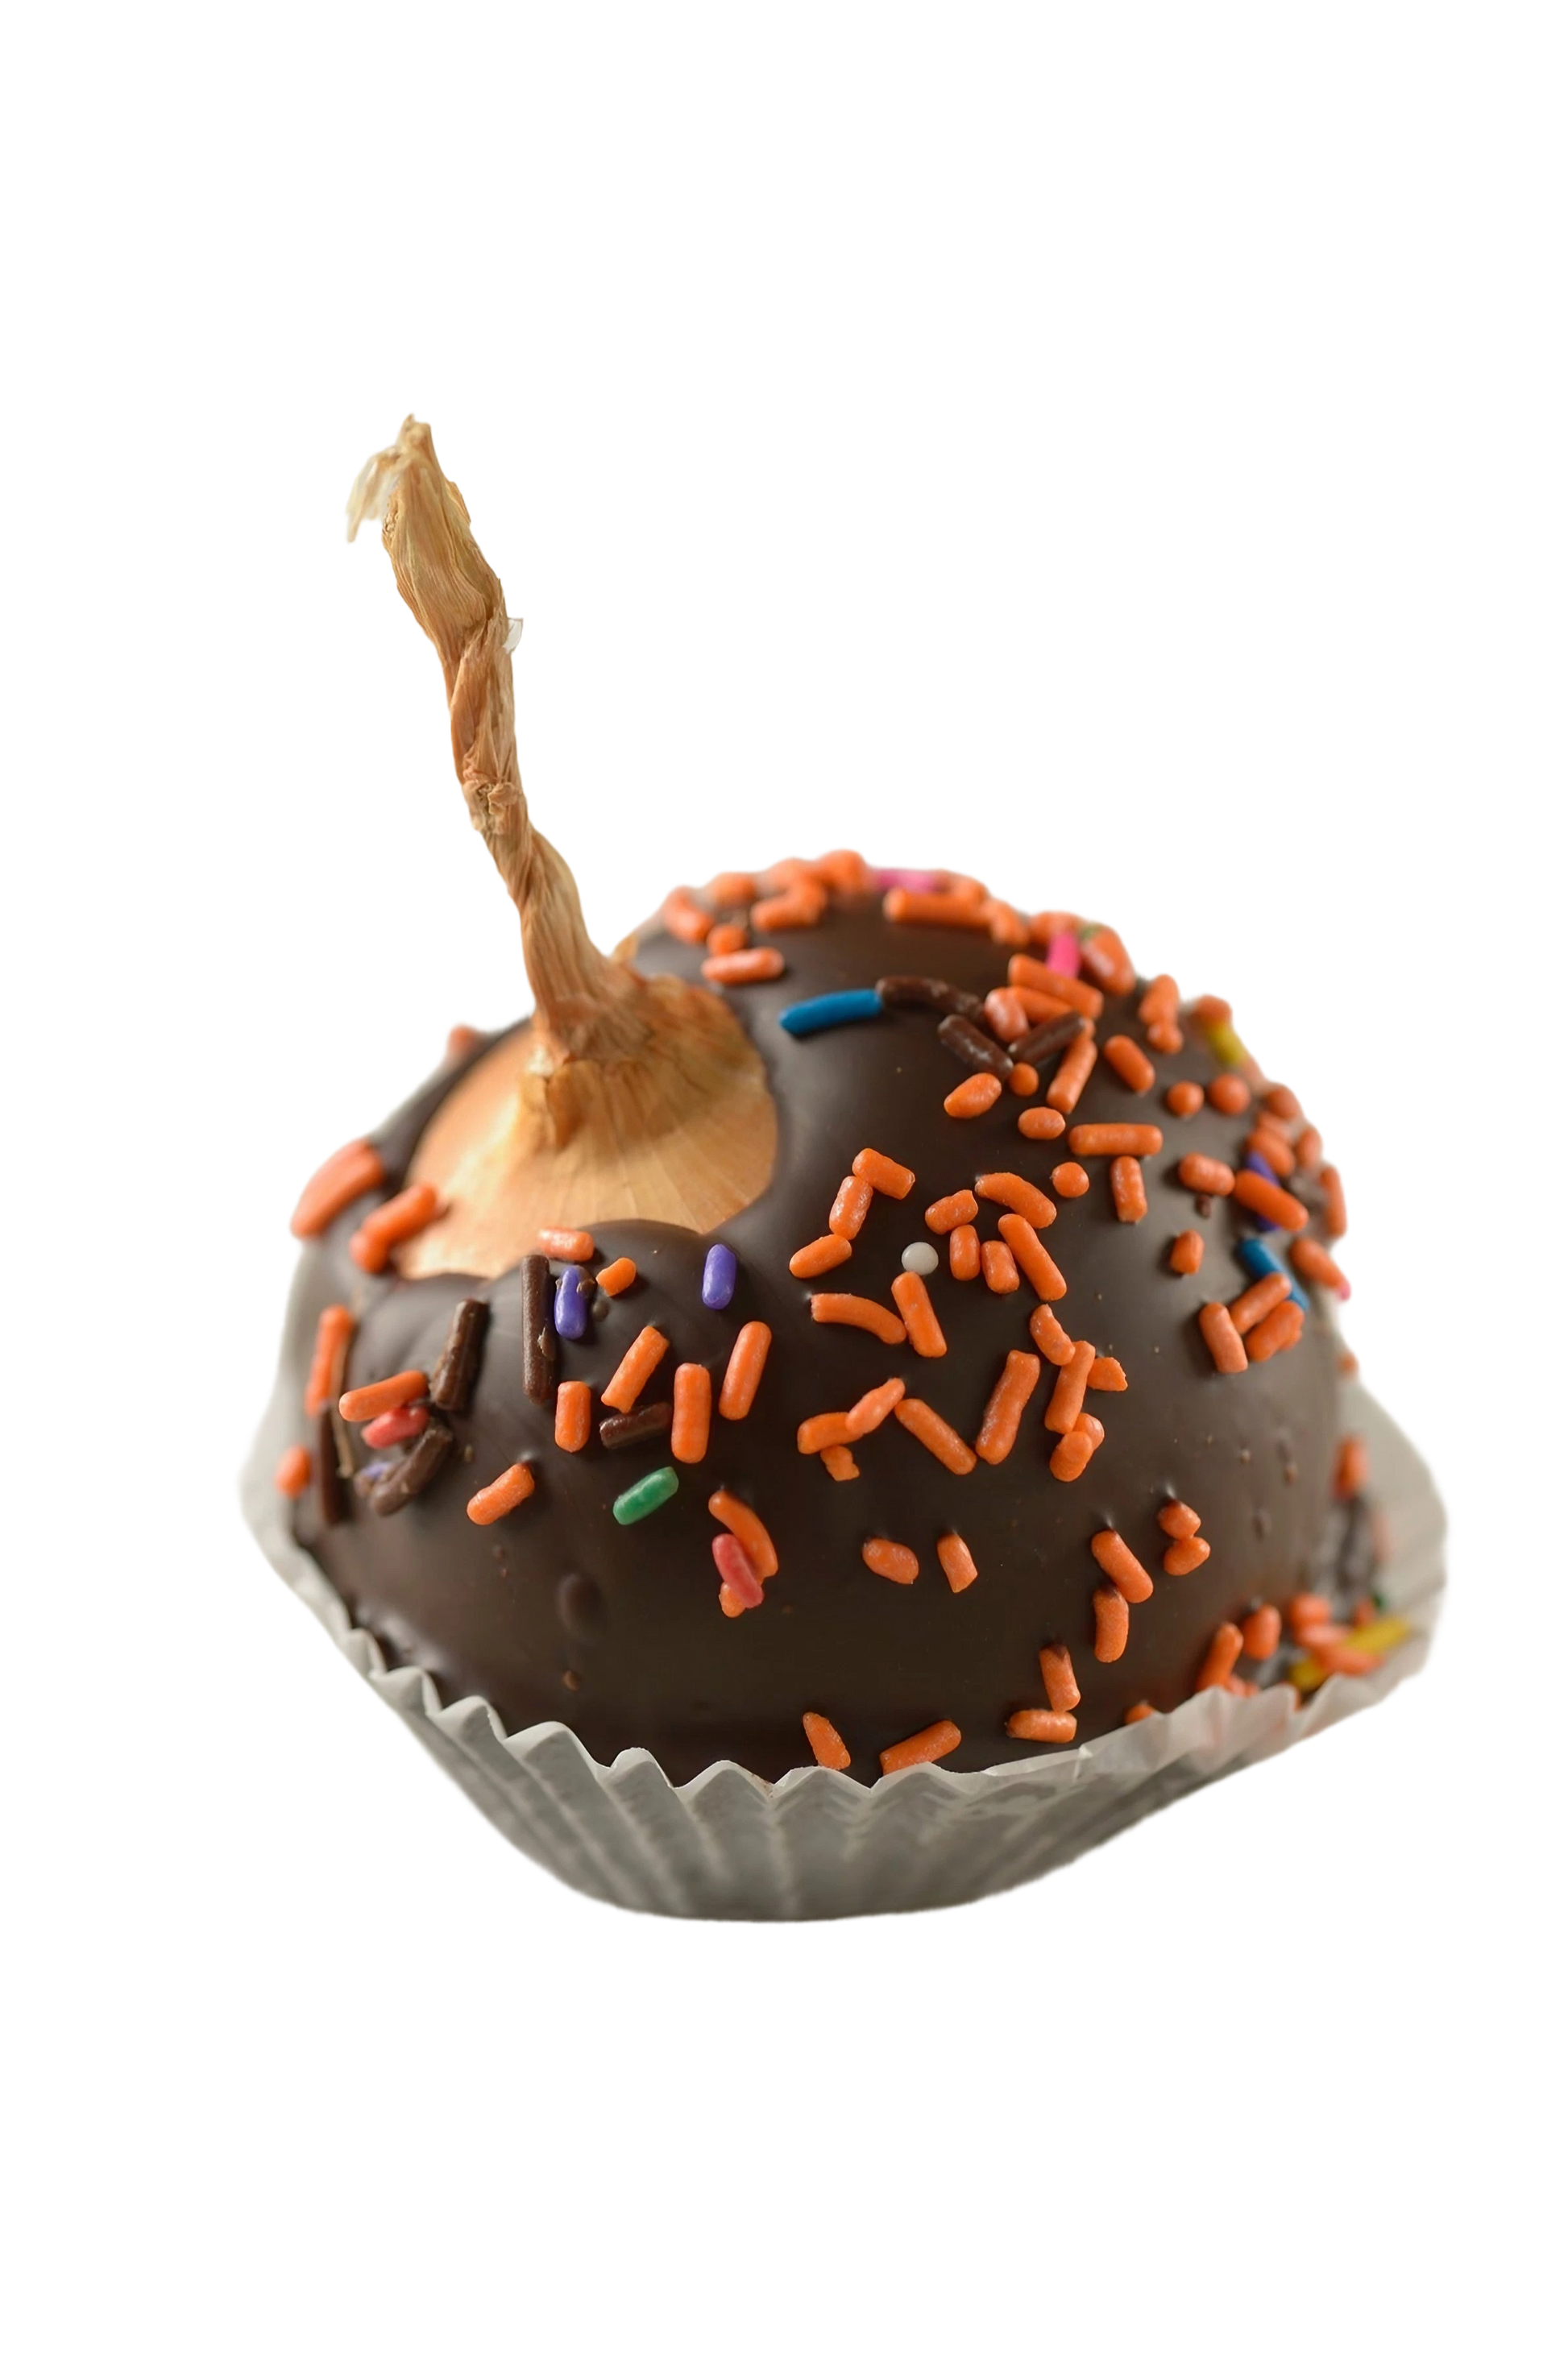 A close-up of a chocolate covered onion with decorative toppings